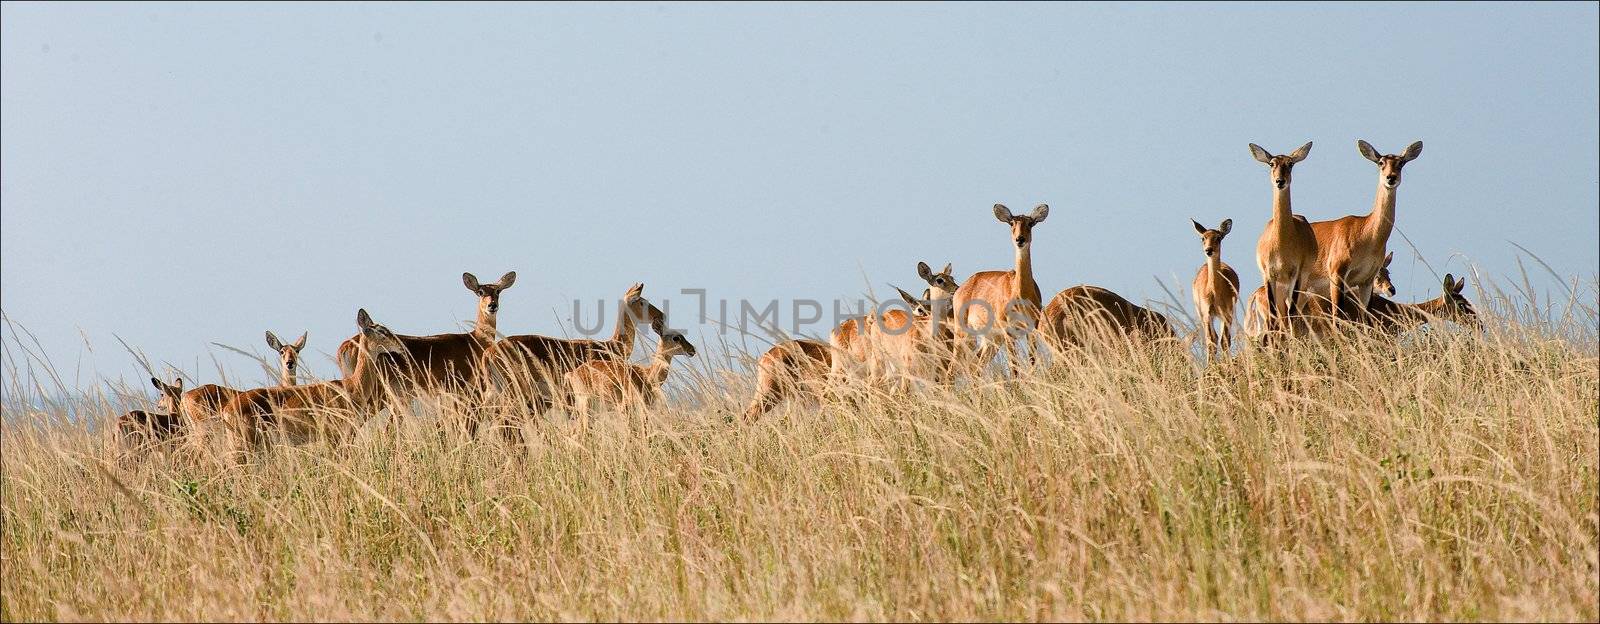 Group of gazelles. by SURZ